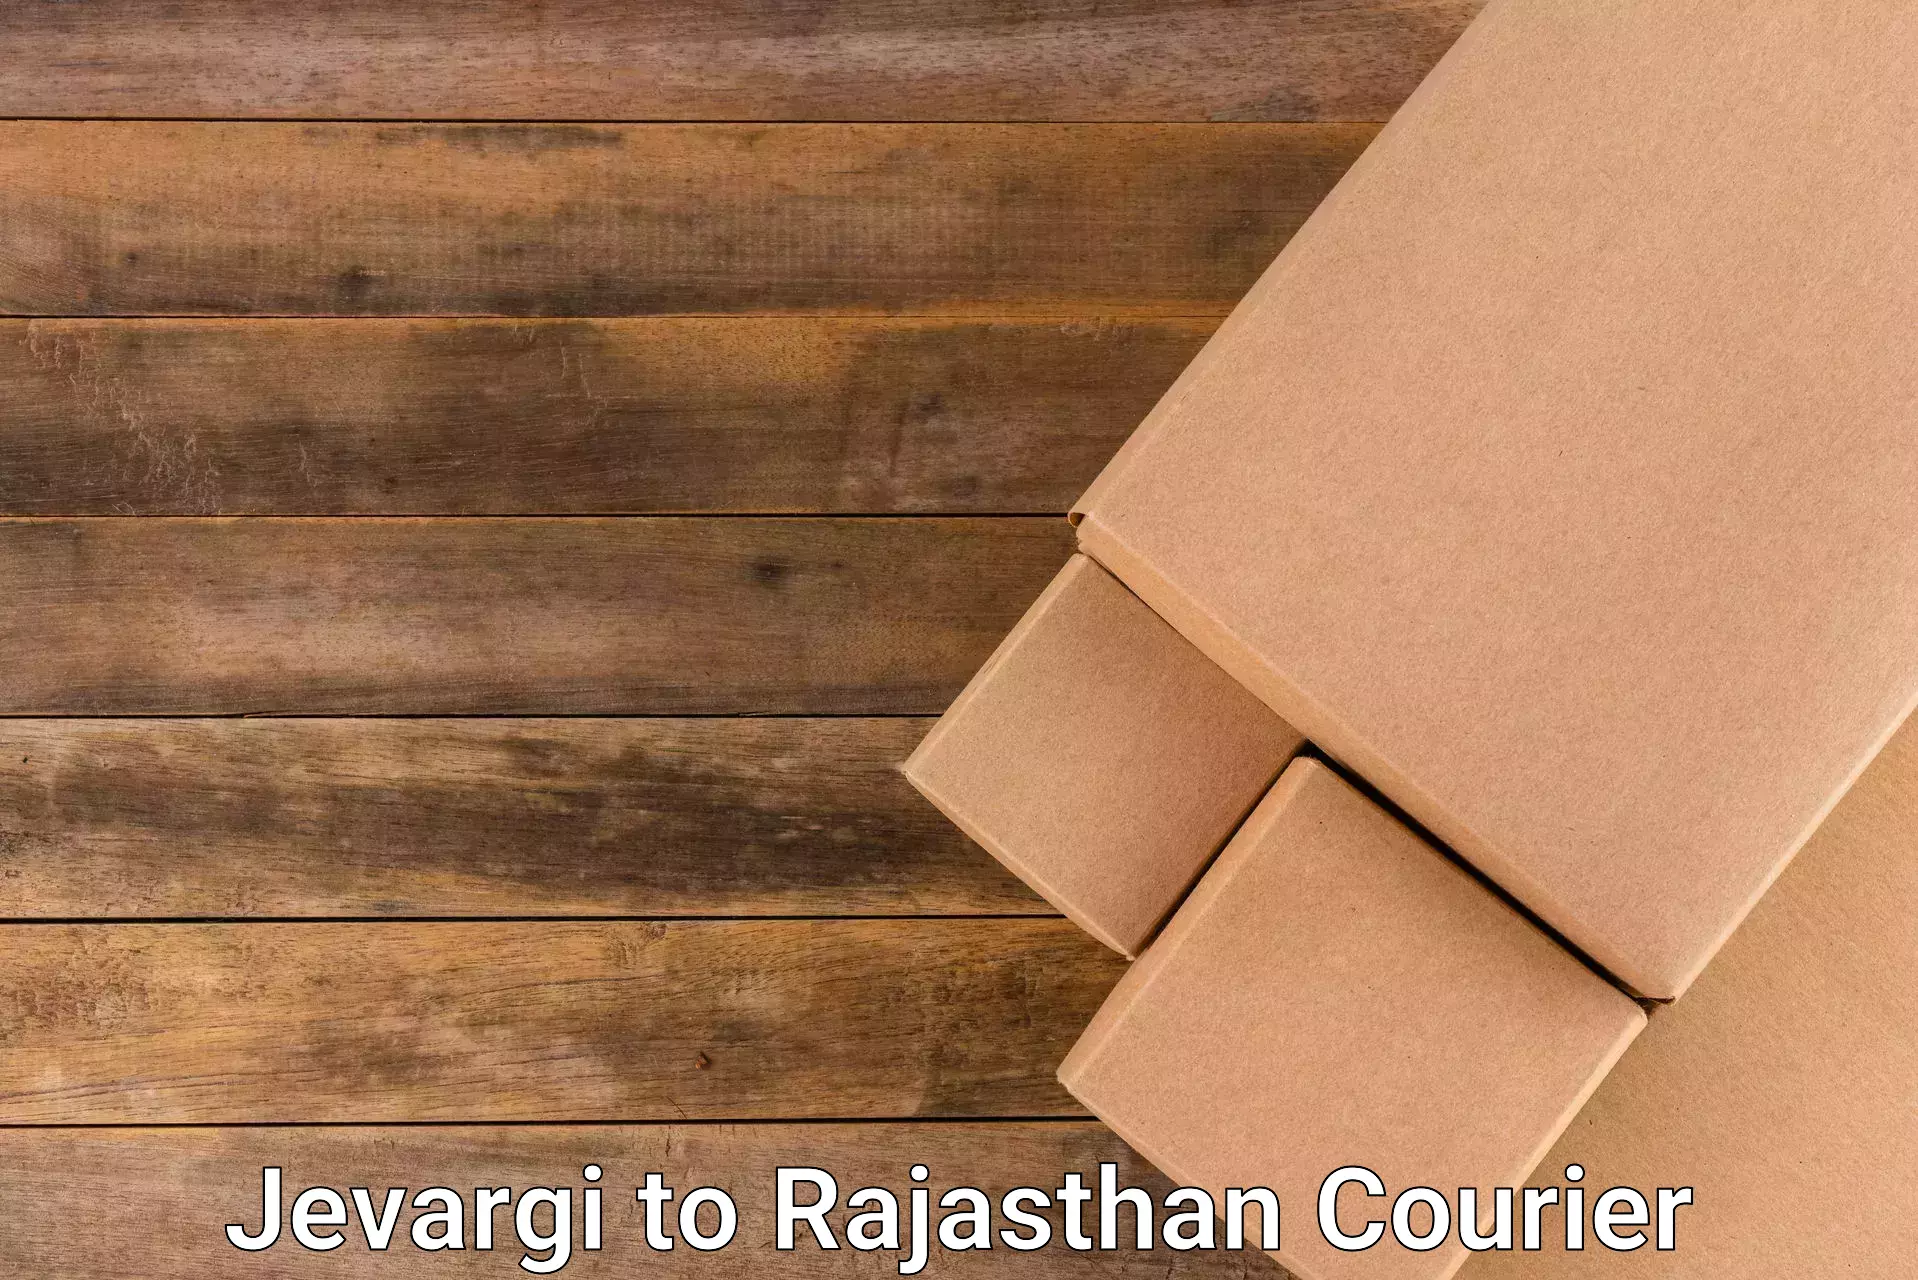 Reliable shipping partners Jevargi to Rajasthan